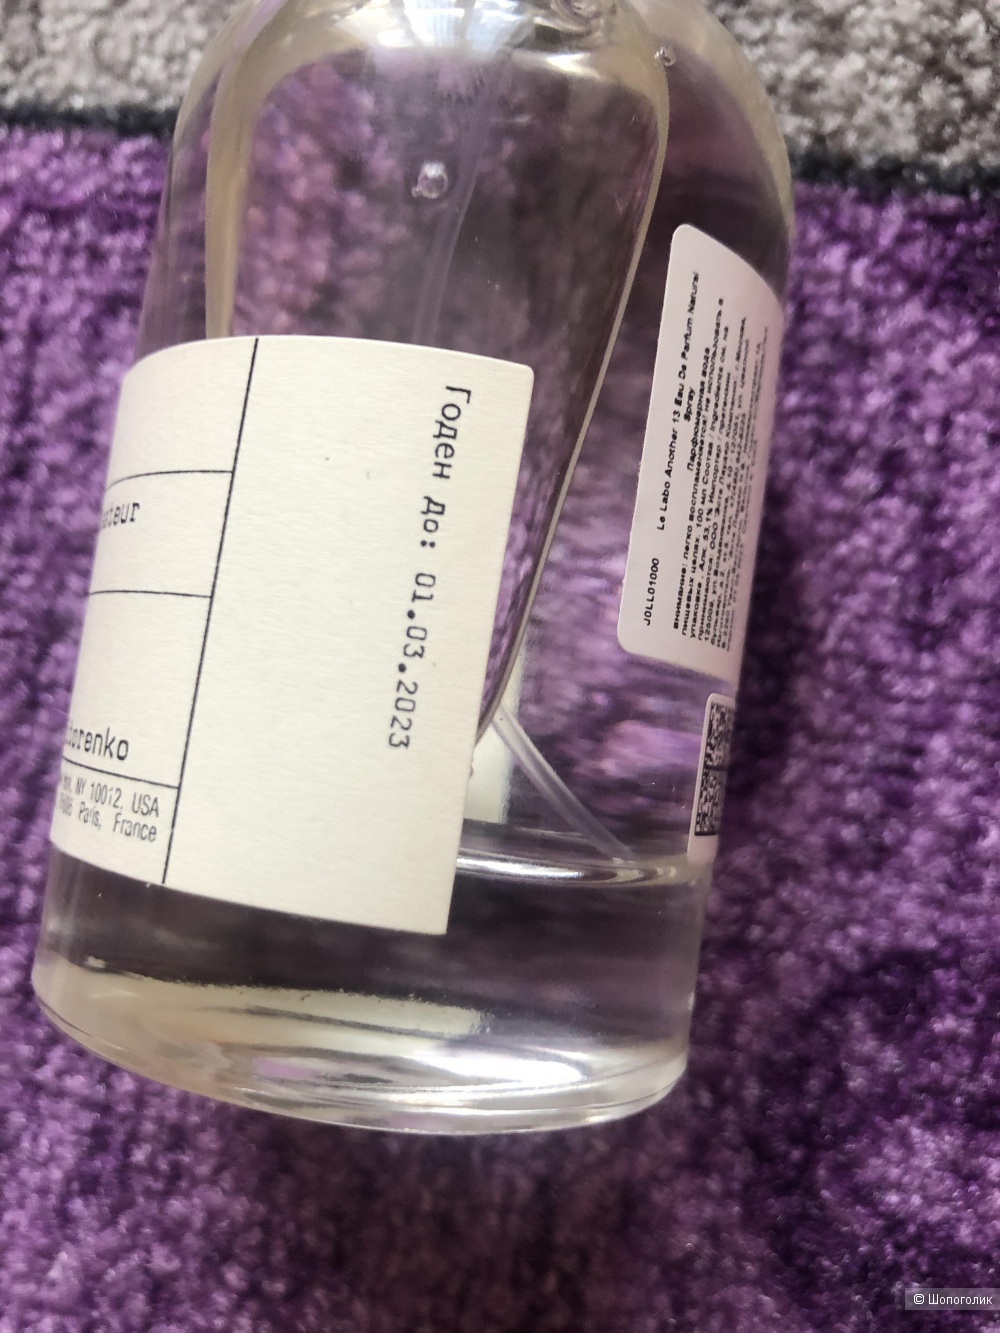 Le labo another 13 100 ml